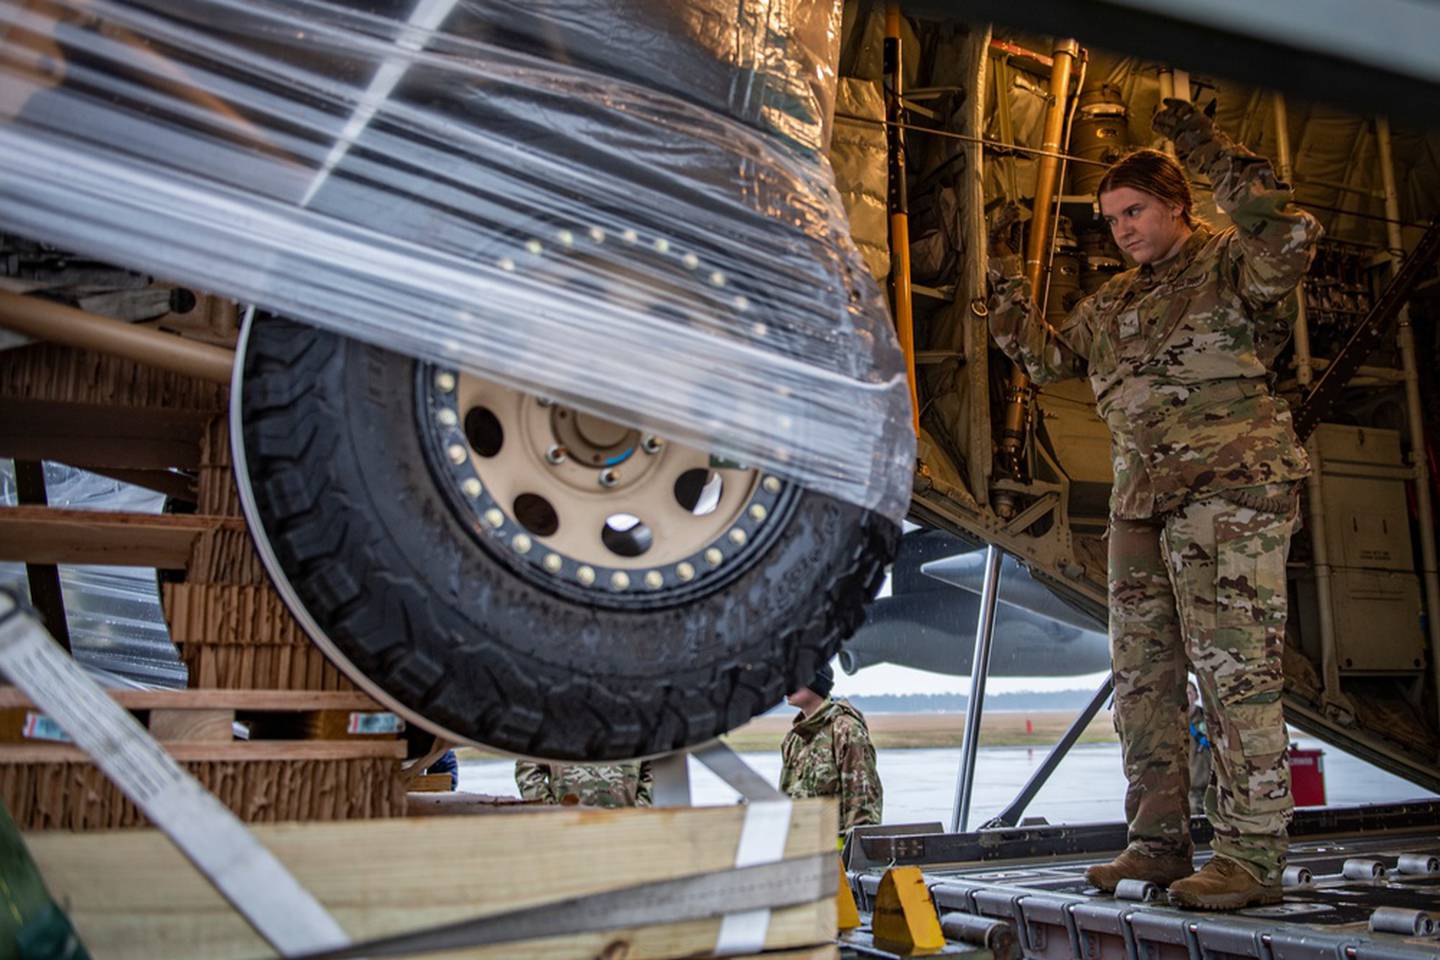 U.S. Air Force Airman 1st Class Taryn Kraemer, 71st Rescue Squadron loadmaster, guides a Side by Vehicle into the back of an HC-130J Combat King II at Moody Air Force Base, Georgia, Jan. 20, 2022. Understanding capabilities and limitations of the loading and support equipment is vital prior to employing it in austere locations. (Master Sgt. Daryl Knee/Air Force)